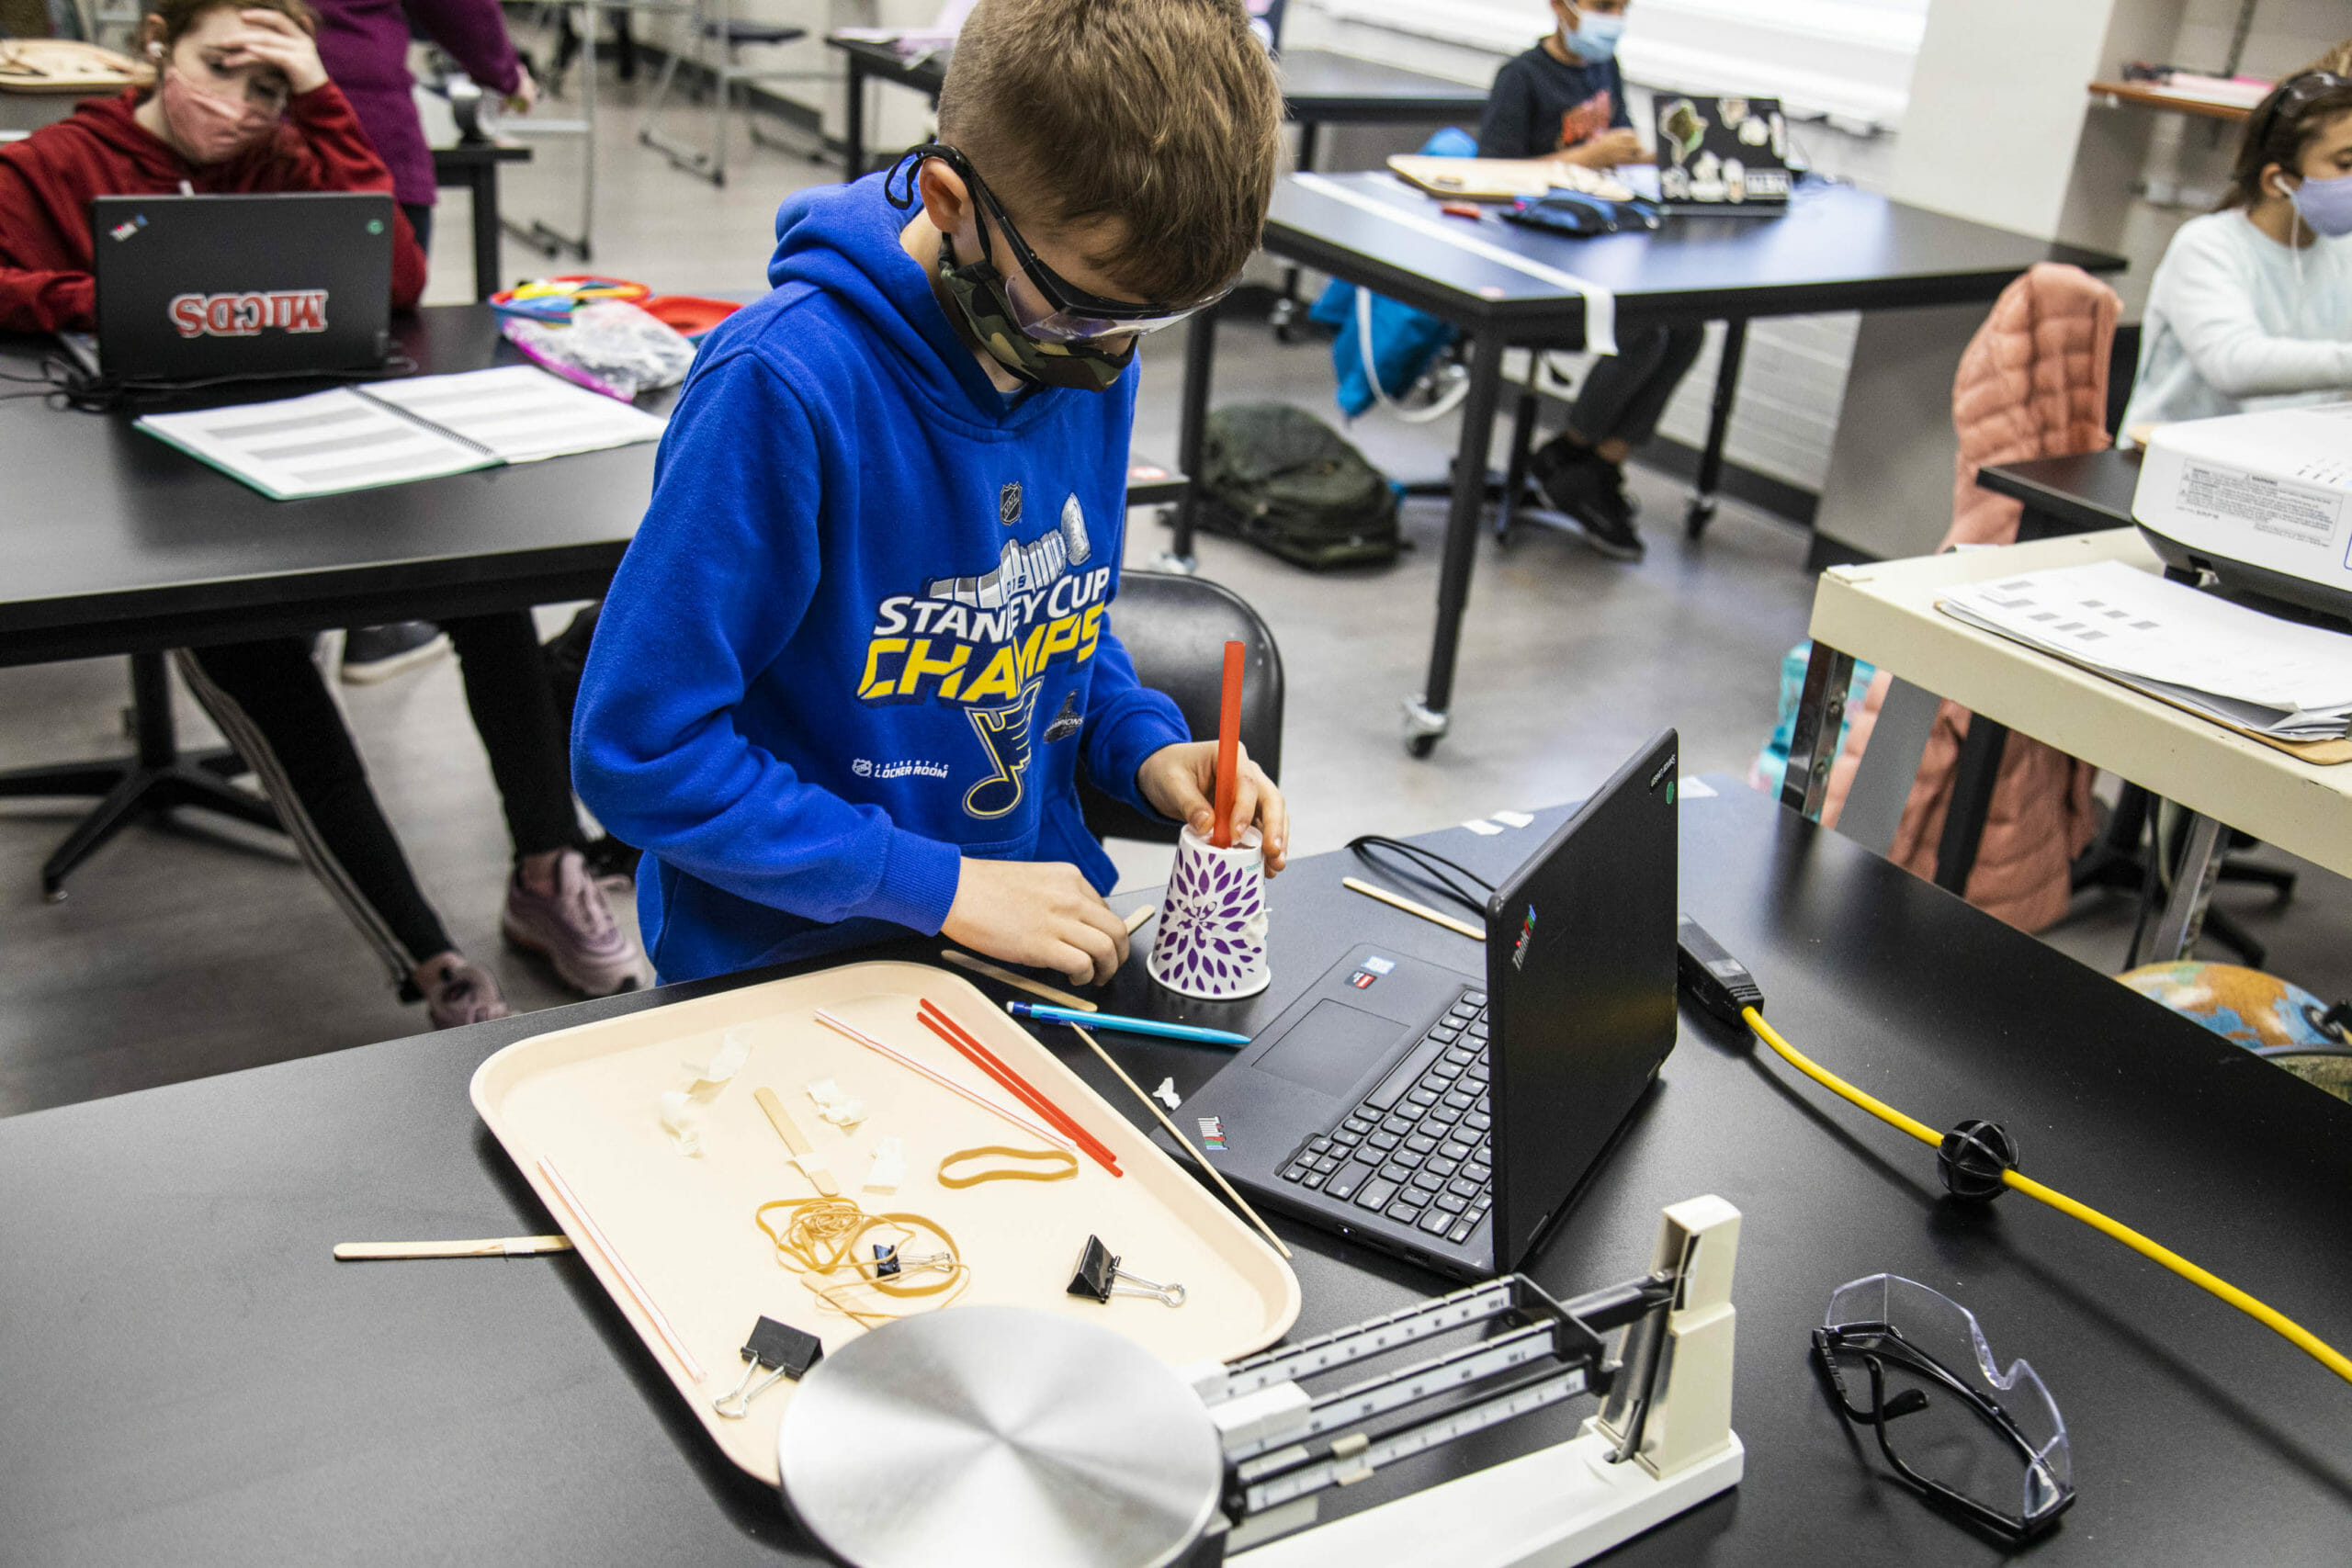 Students build Asteroid Samplers in Science